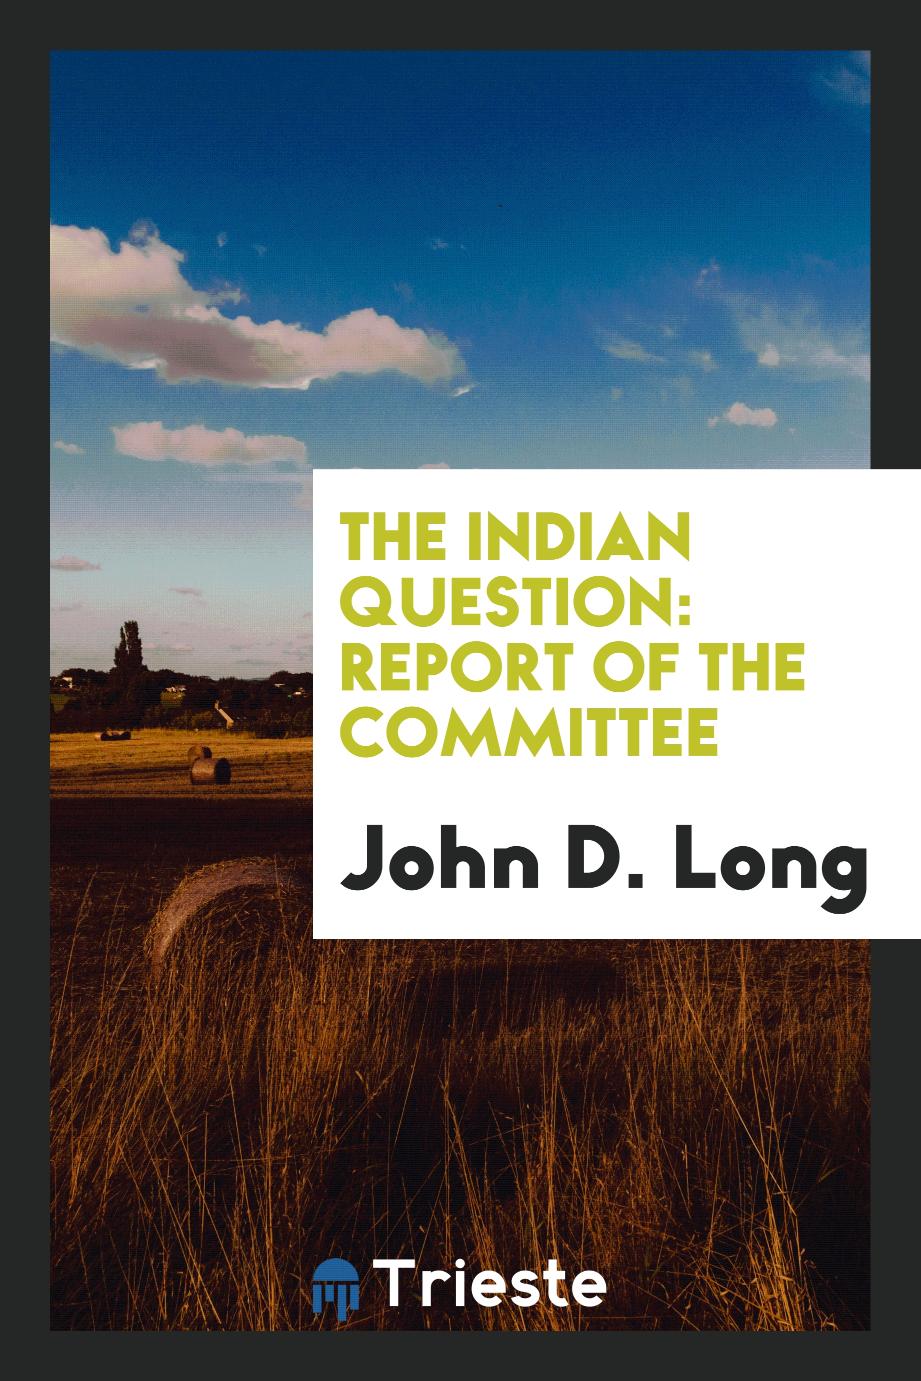 The Indian Question: Report of the Committee